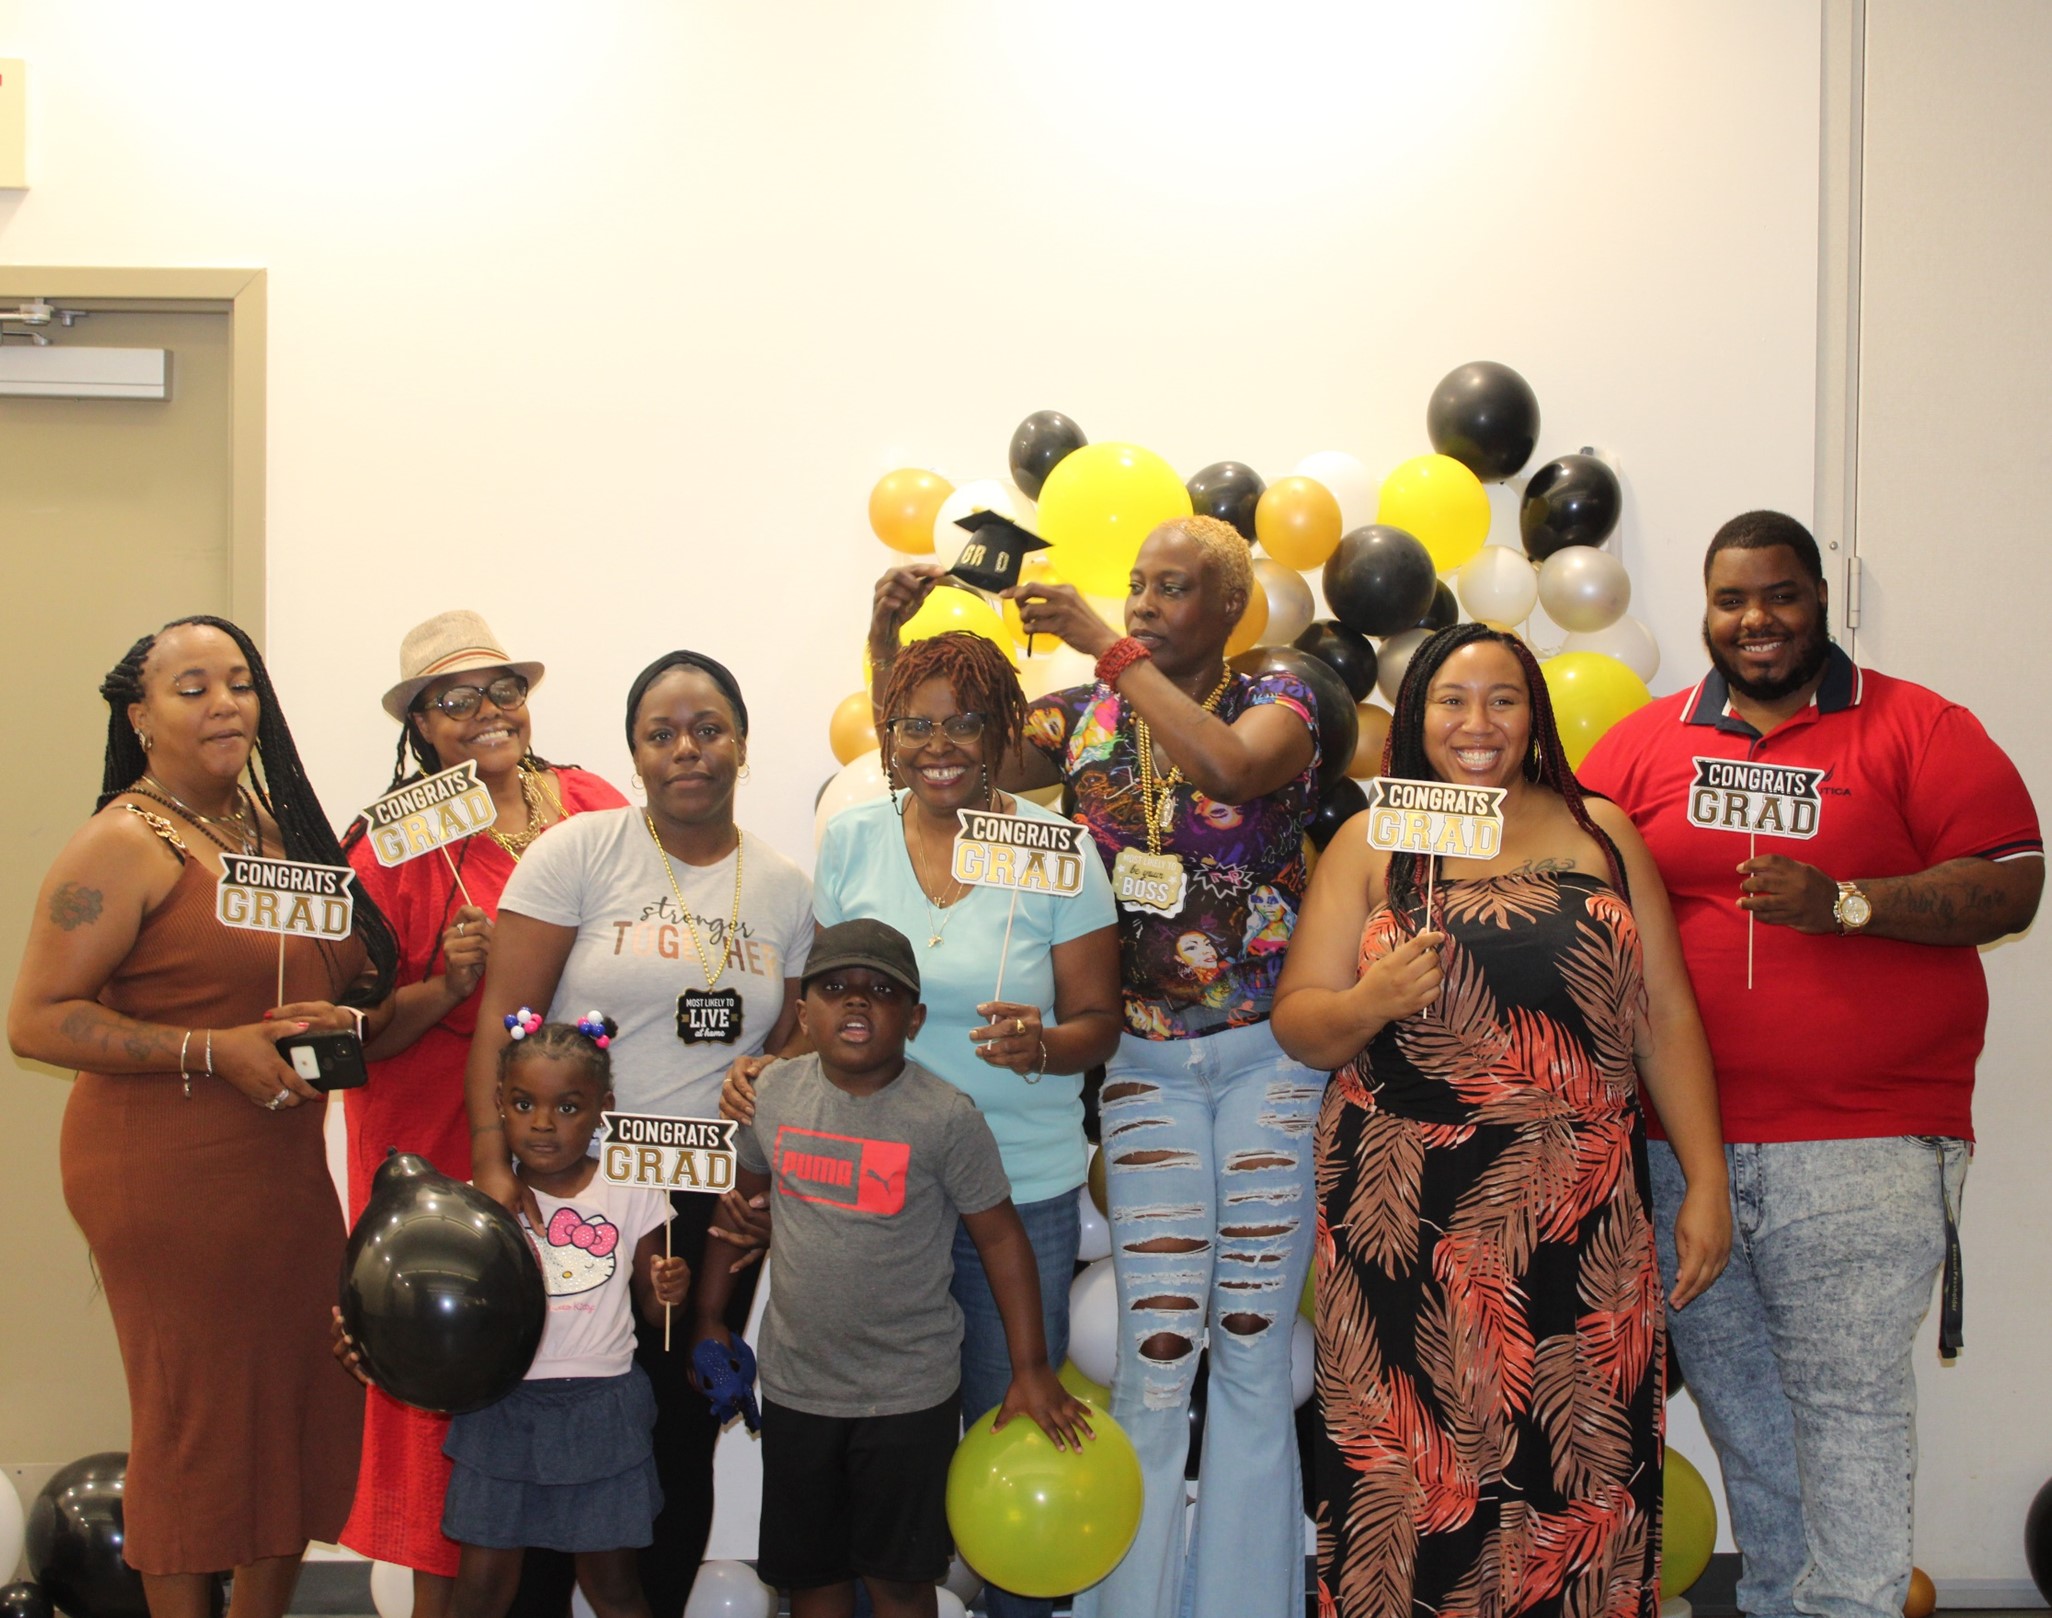 Image of Beams to Bridges participants (one of Steel Smiling's programs) at their graduation. Everyone stands smiling at the camera, some holding photobooth props such as a mini graduation cap, balloons, or signs that say "congrats, grad!" Behind them is a short balloon arch made of black and yellow ballons.